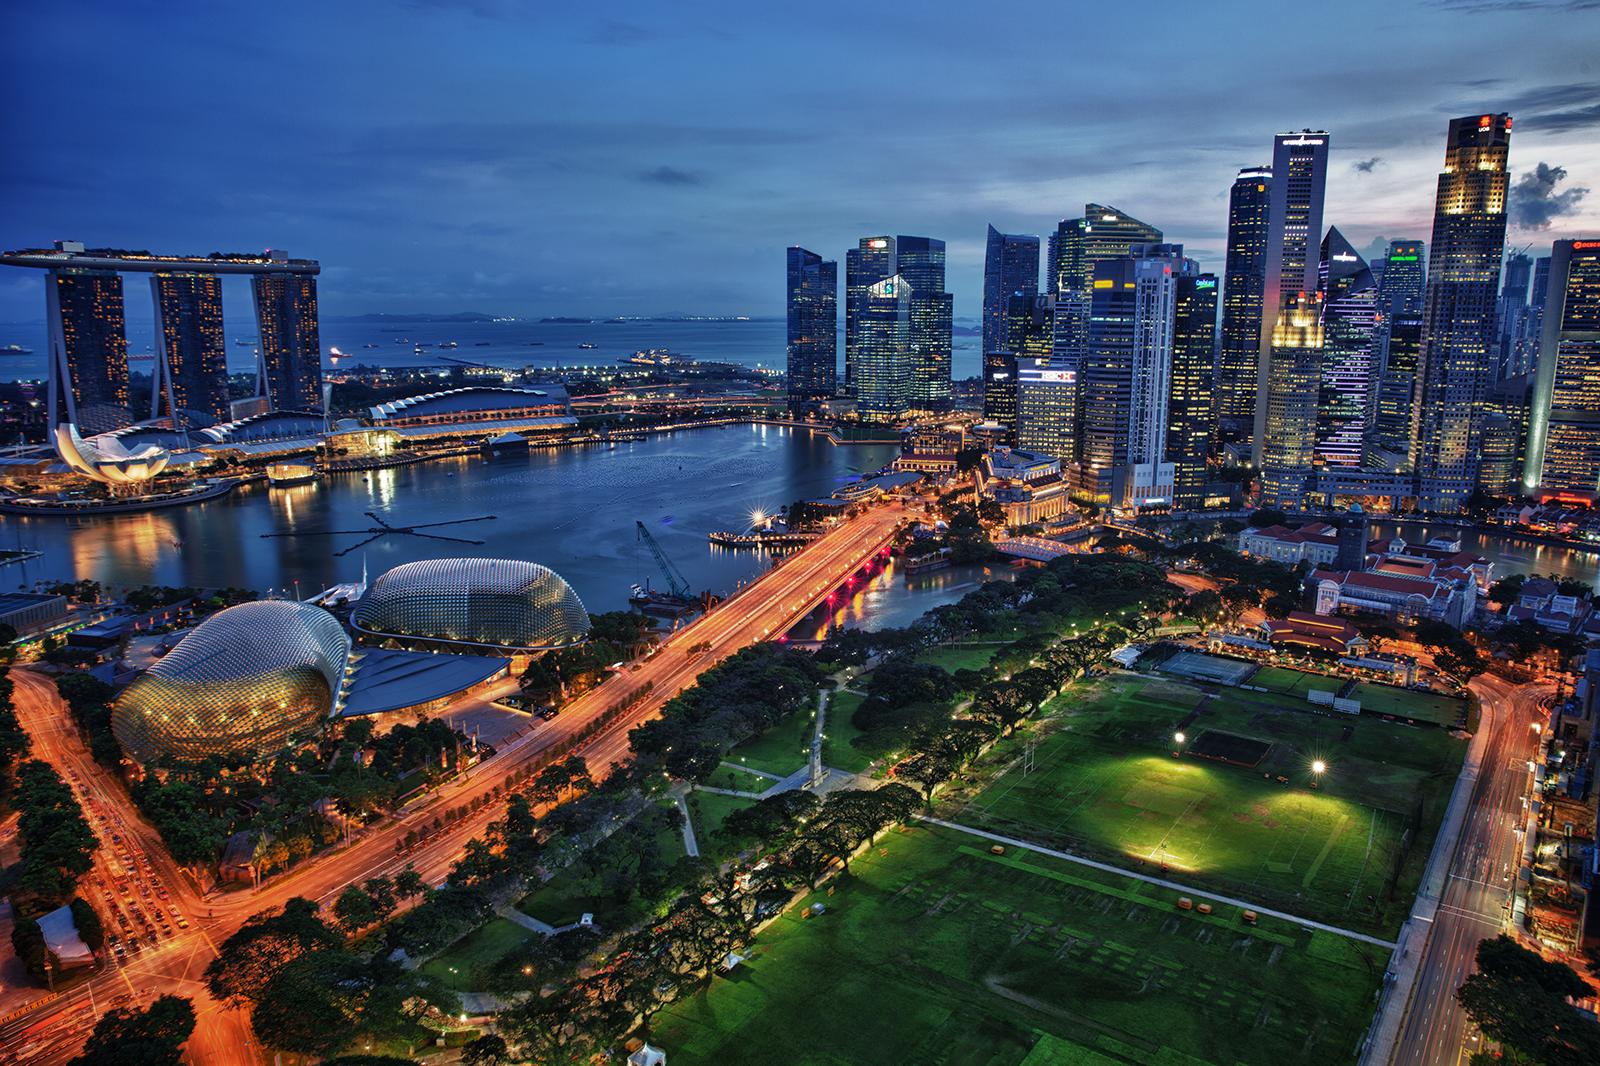 Futuristic city: How the Singapore skyline changed over the past decade